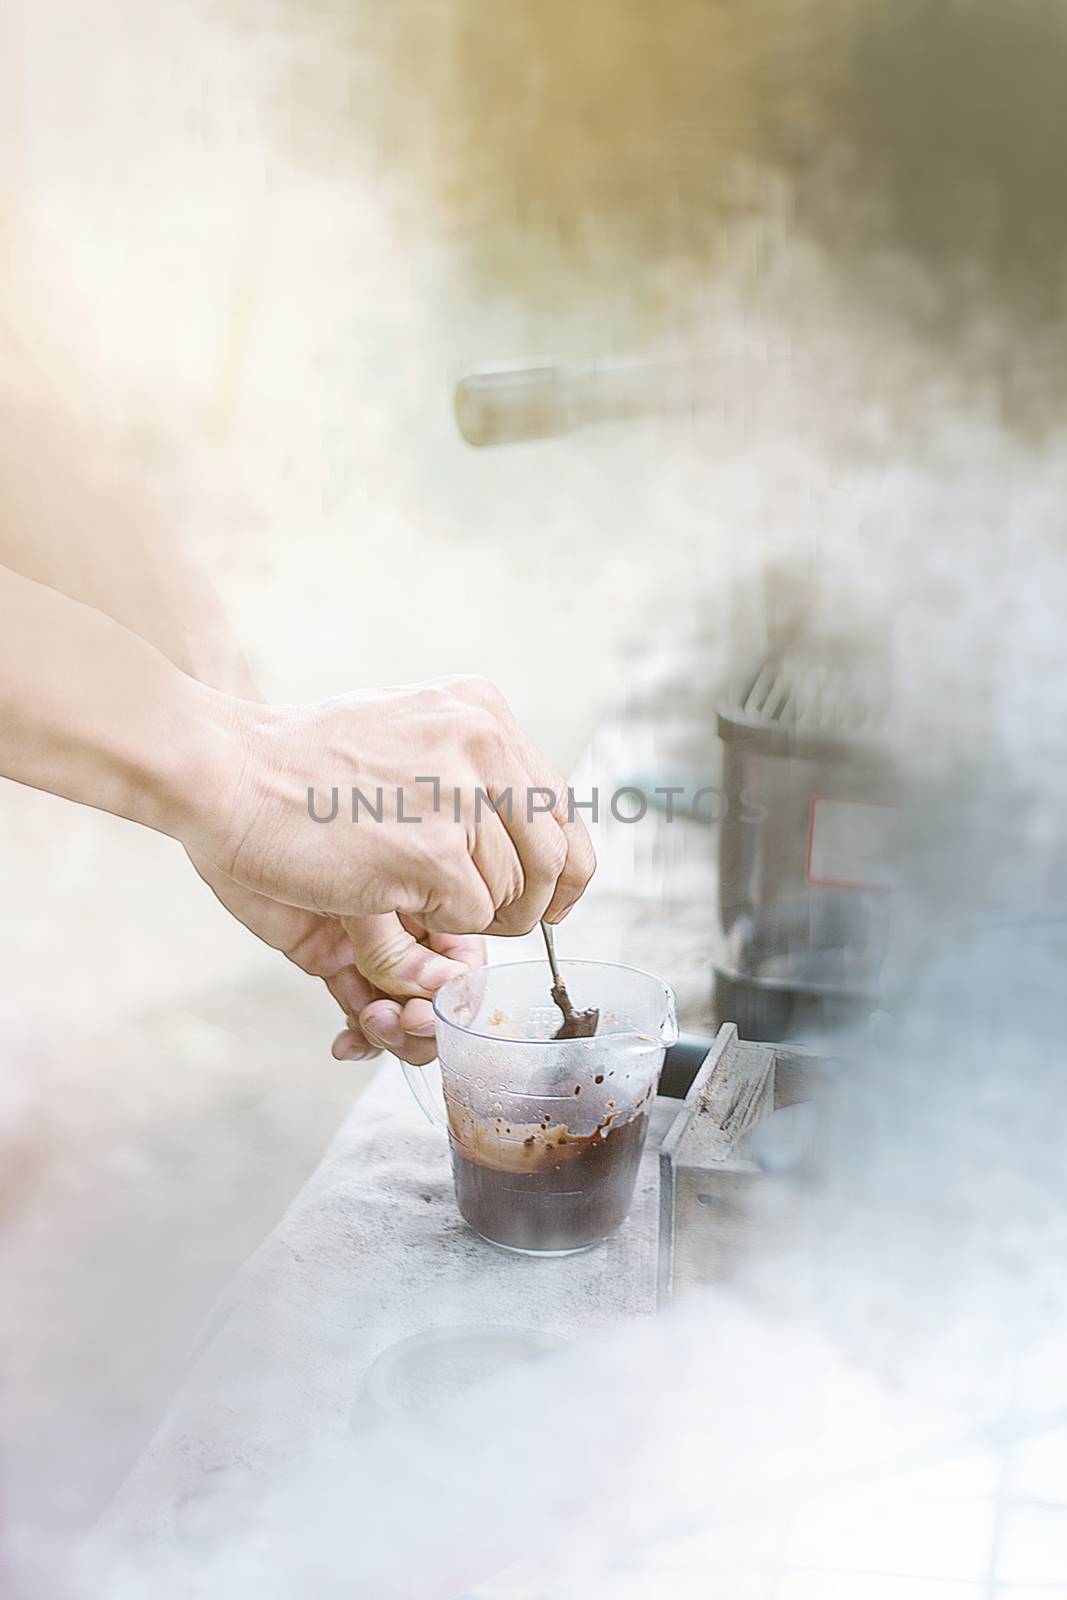 Barista mixing milk and chocolate on espresso machine for making by rakoptonLPN